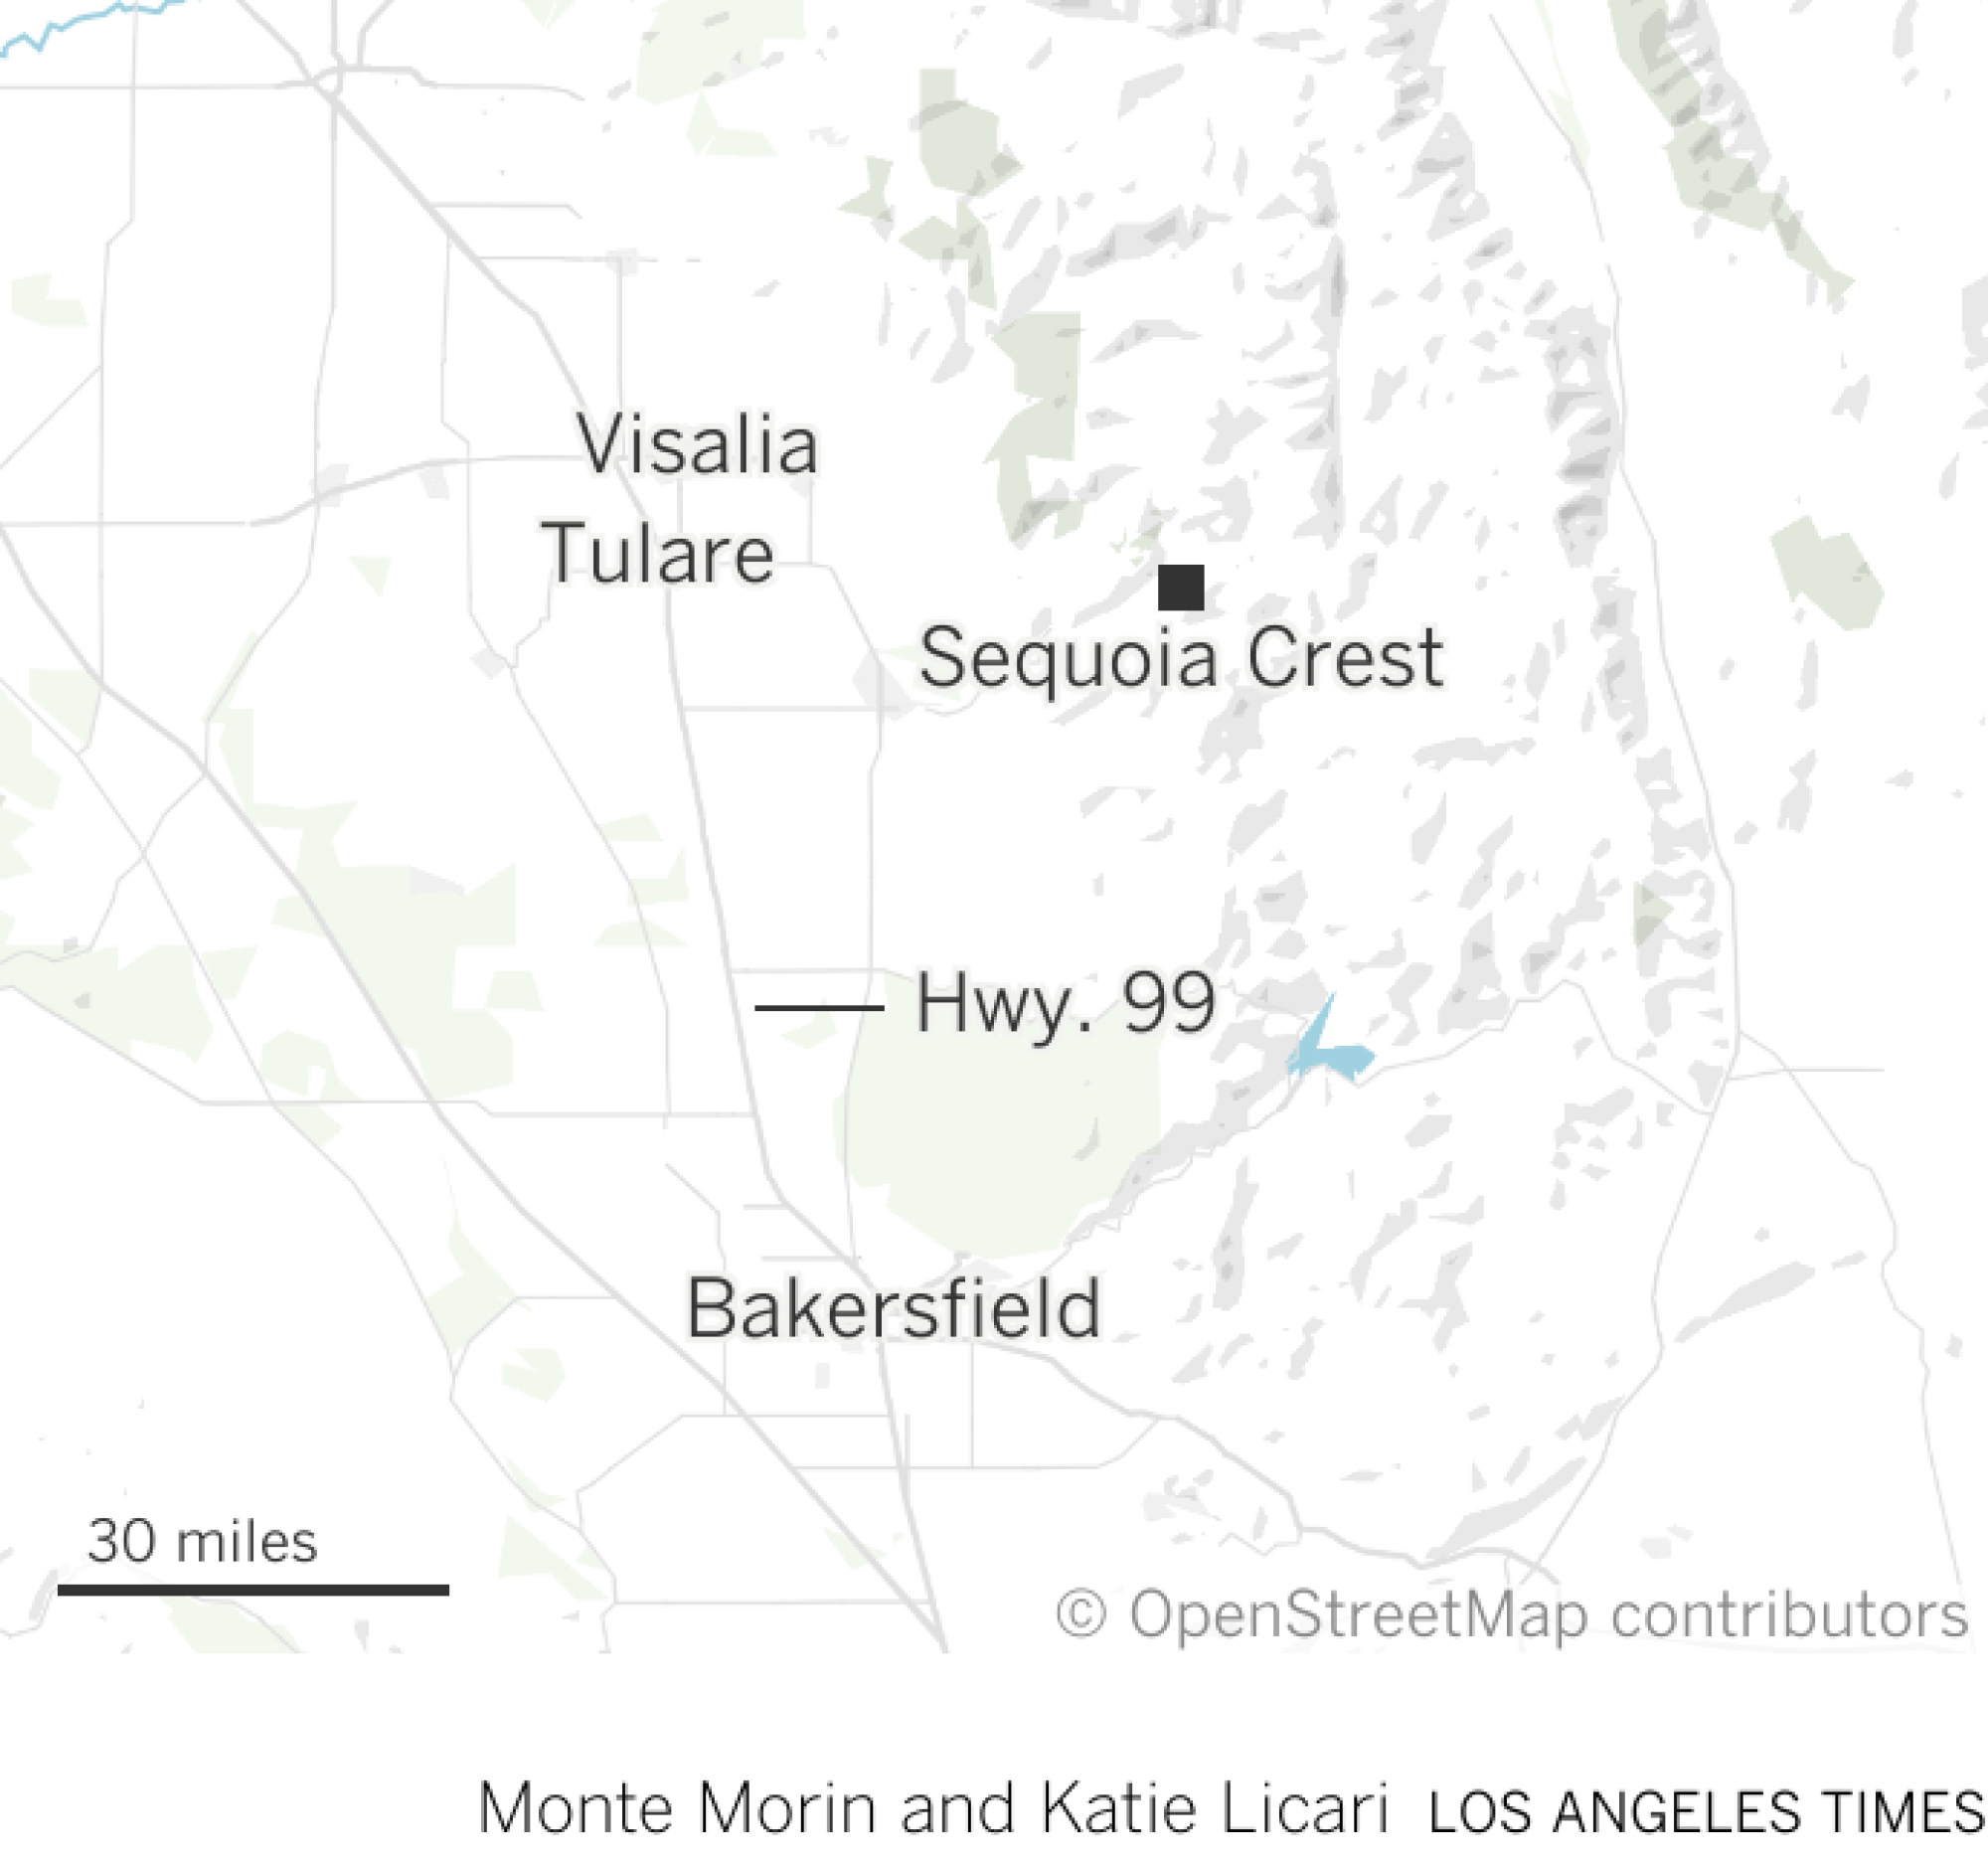 This is a location map which shows the location of Sequoia Crest located near and within Giant Sequoia National Monument in relation to the cities of  Tulare and Bakersfield. 